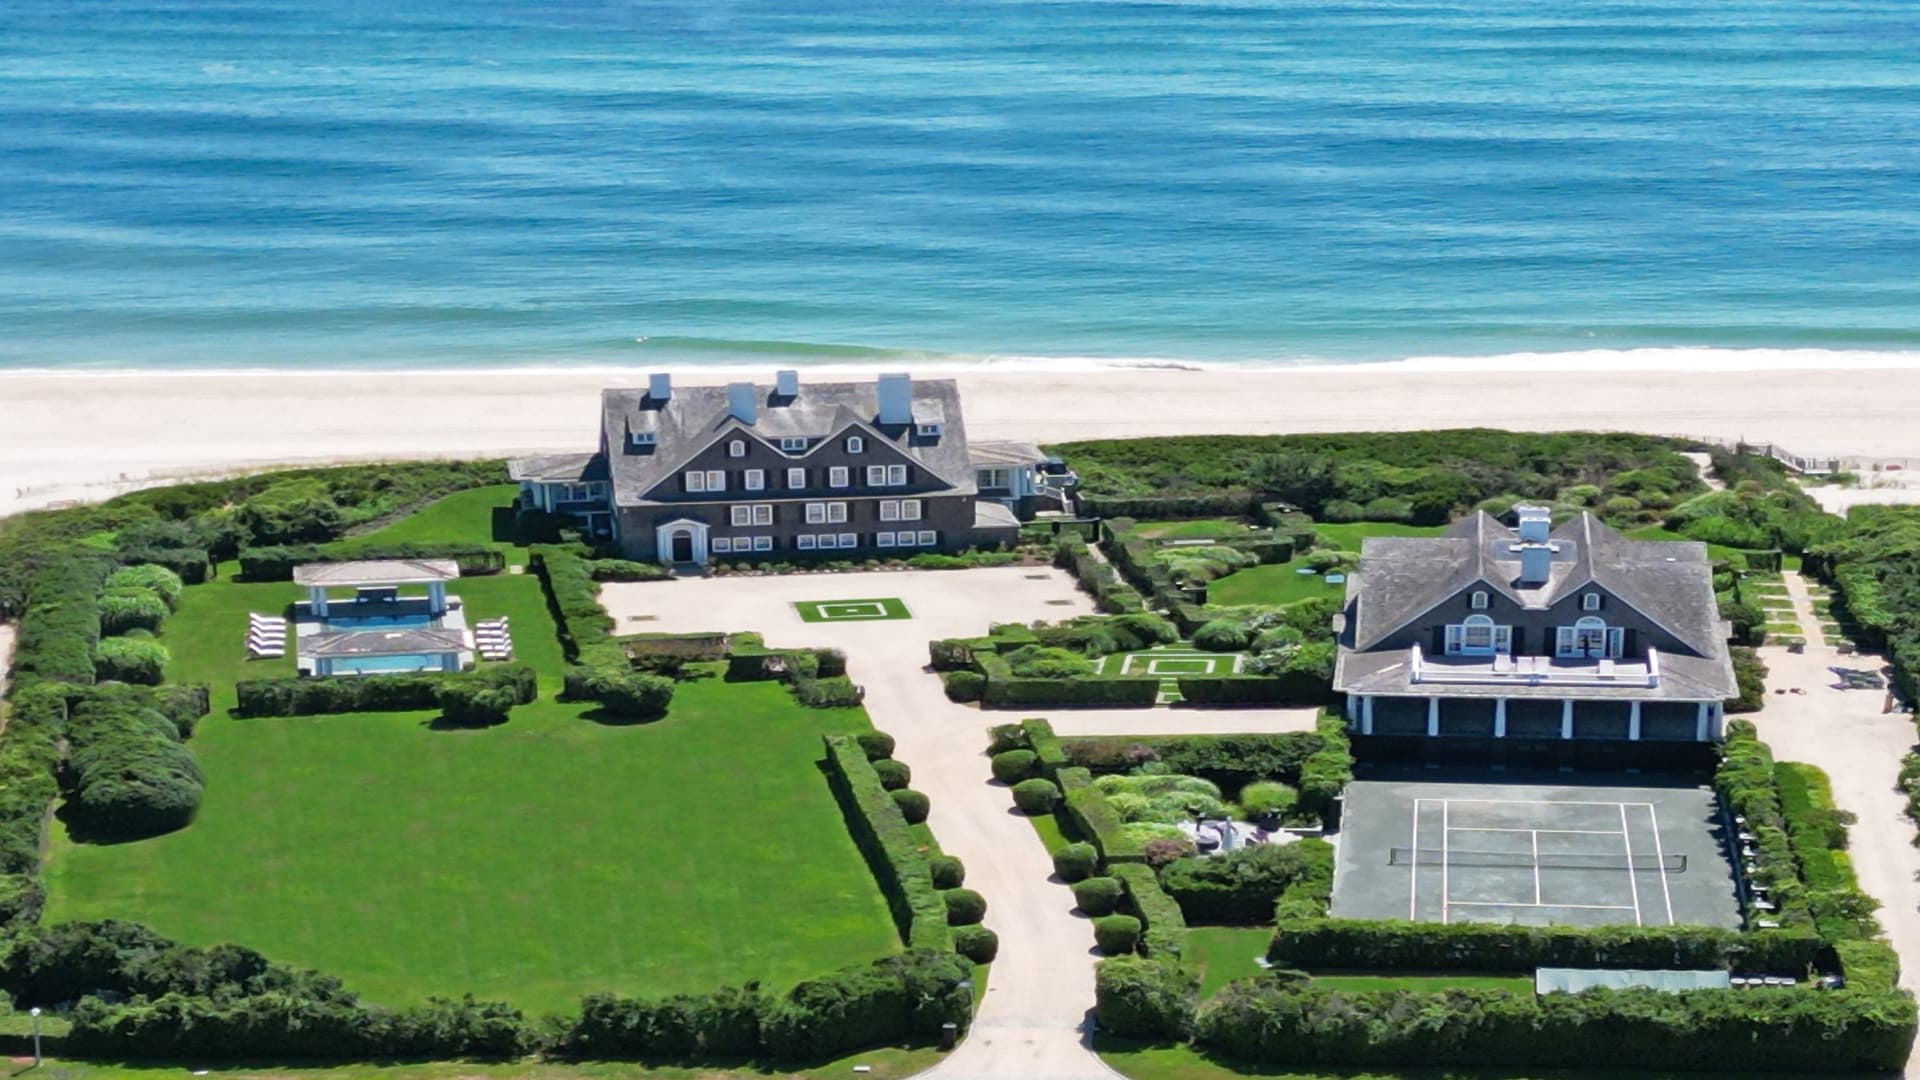 19 Exciting New Things Happening in the Hamptons This Summer